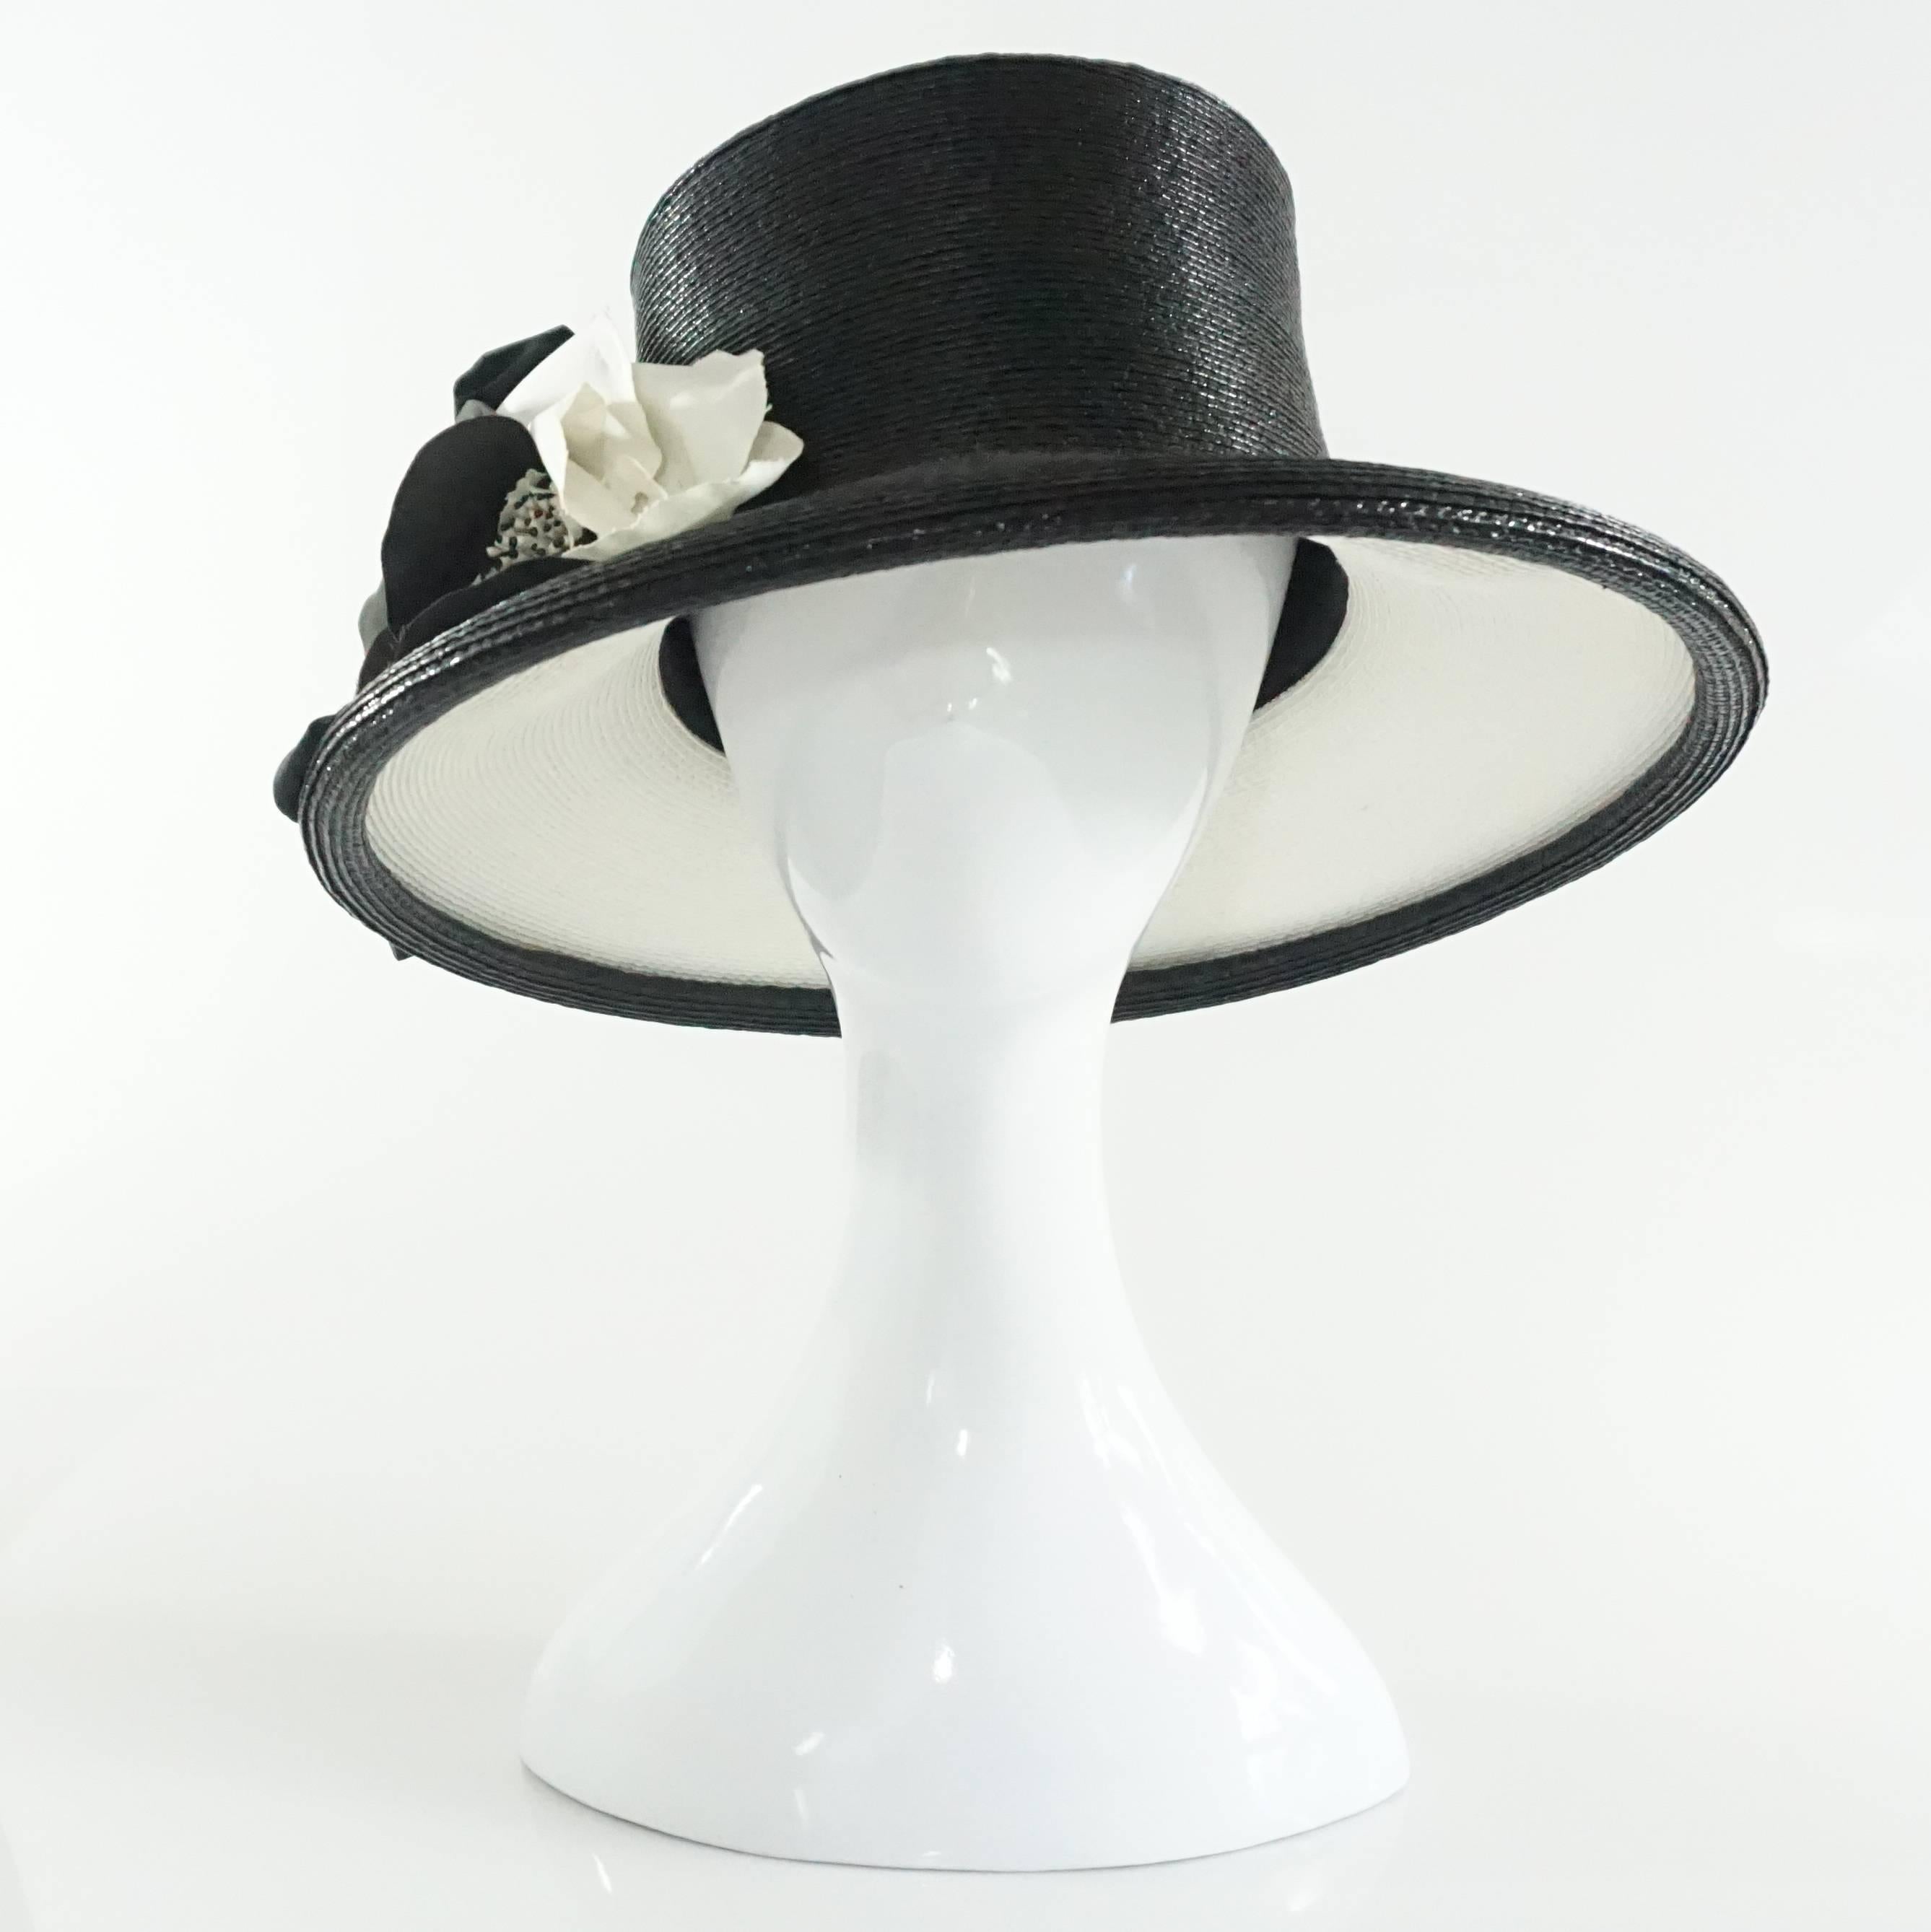 Suzanne Couture Millinery Black Gloss Straw Hat with Silk Flower 3